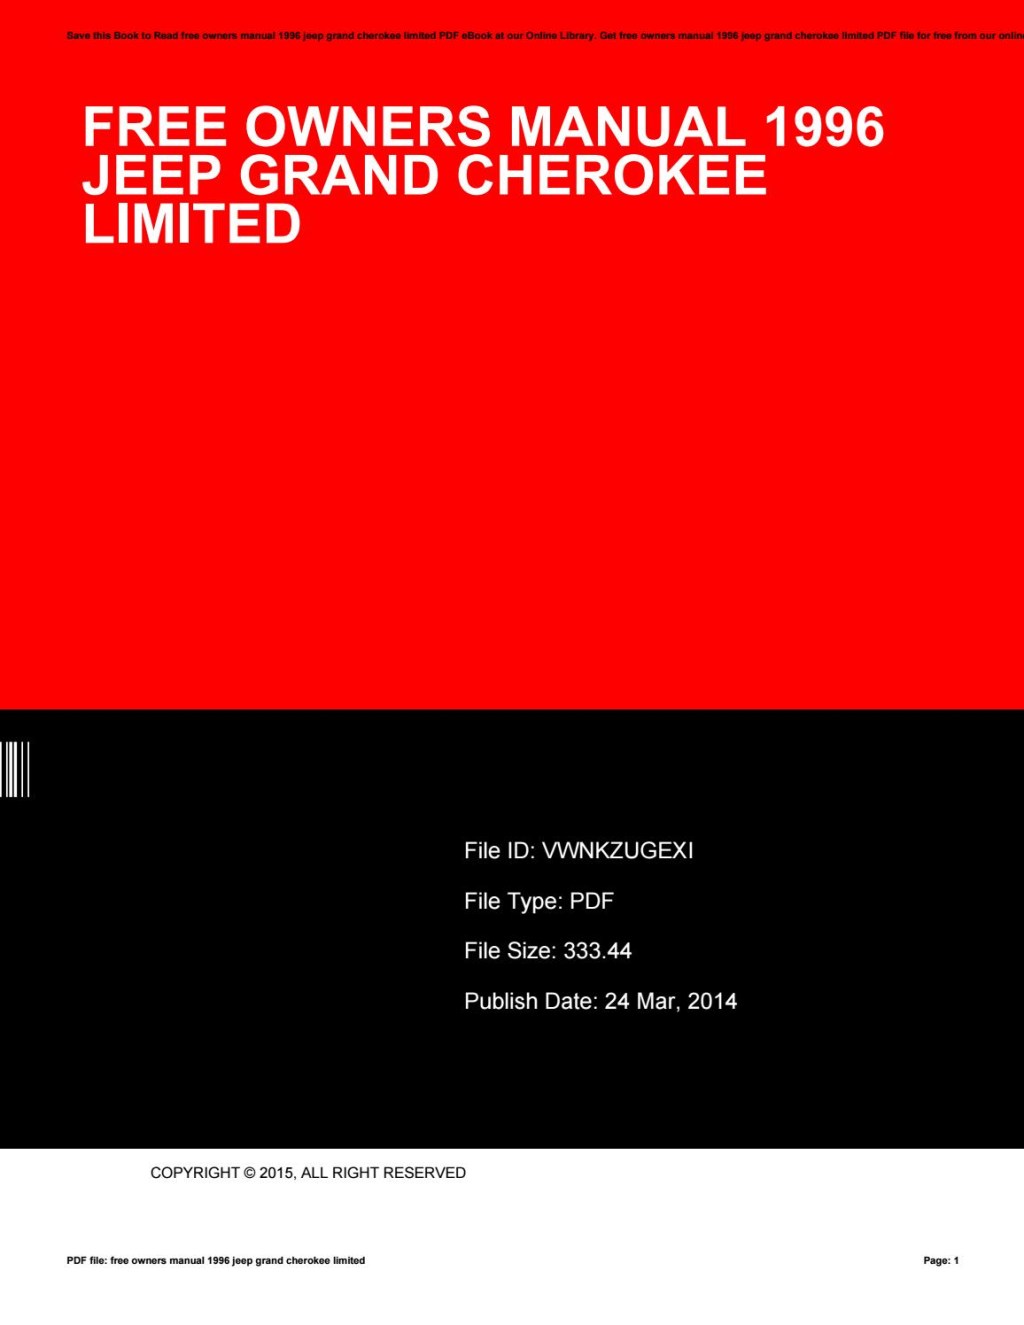 Picture of: Free owners manual  jeep grand cherokee limited by